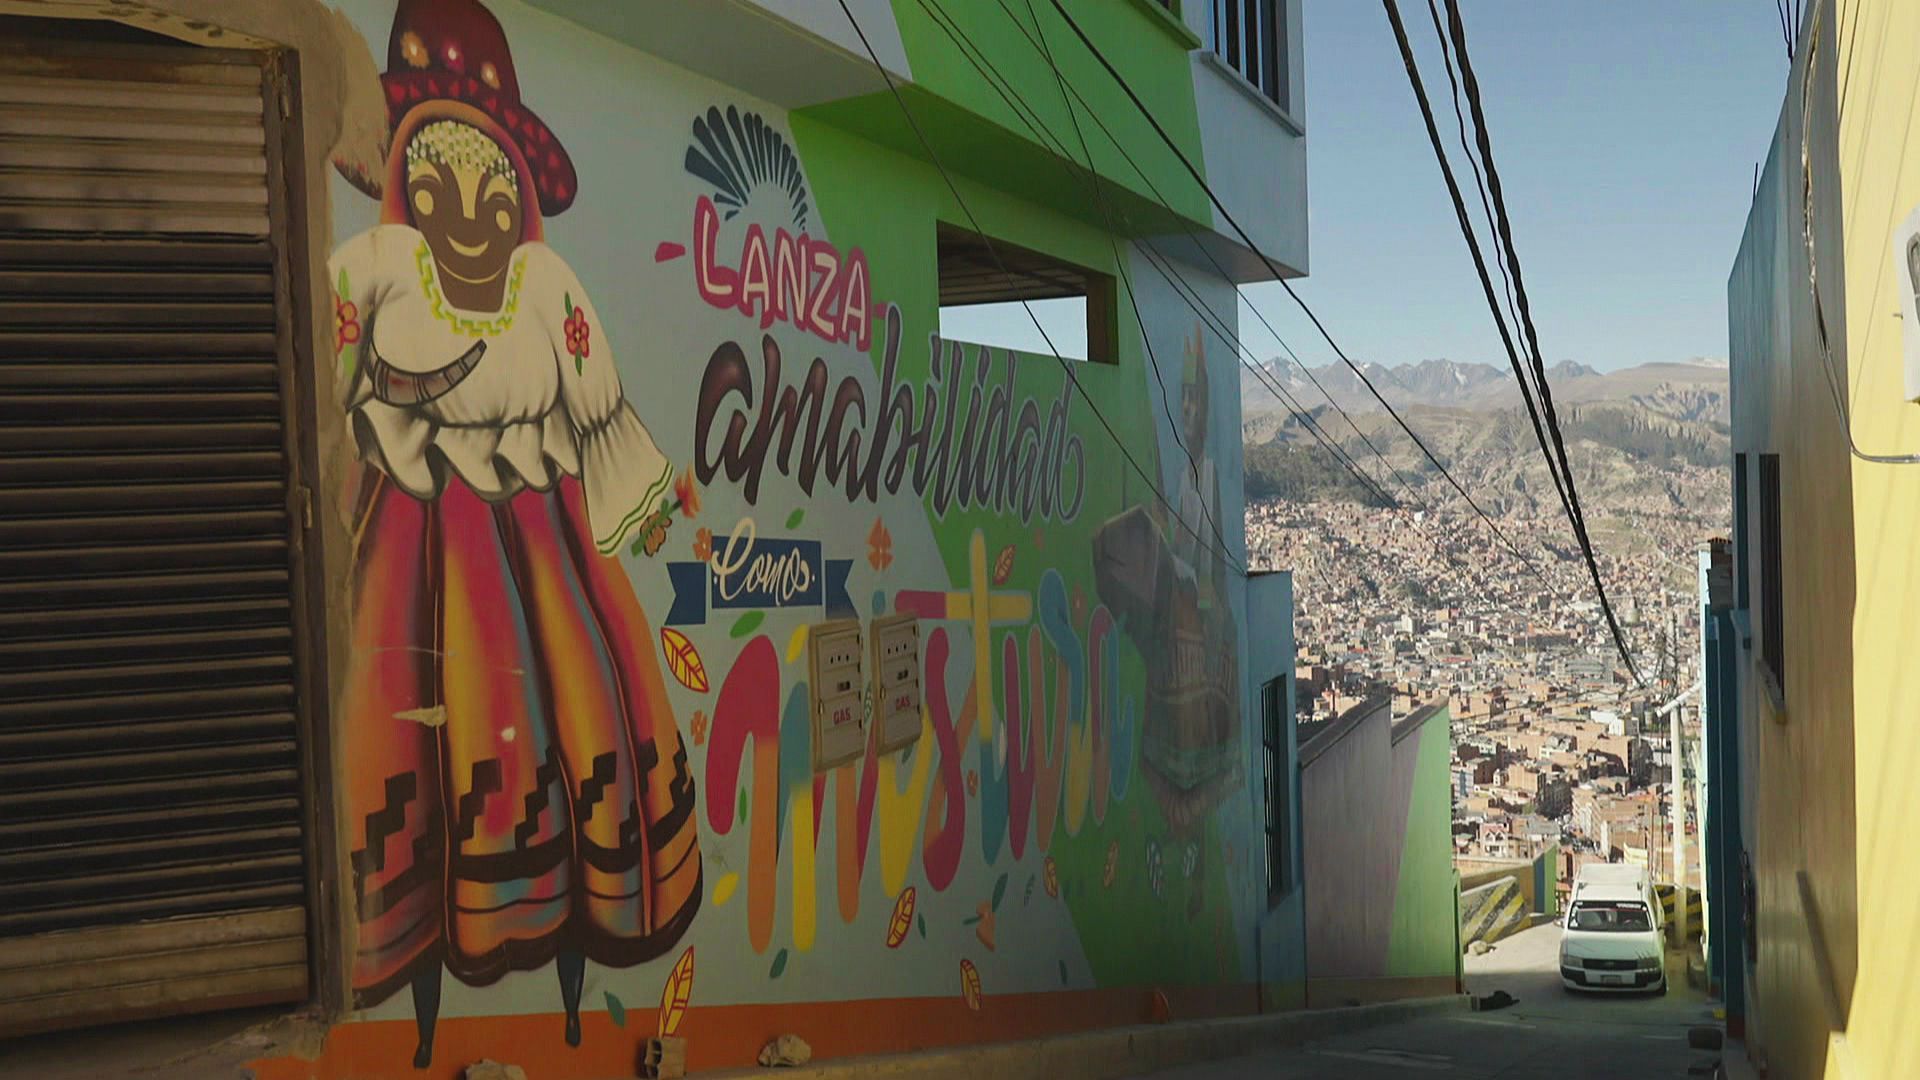 4 Streets of La Paz: Inca traditions and the world's largest cable car network